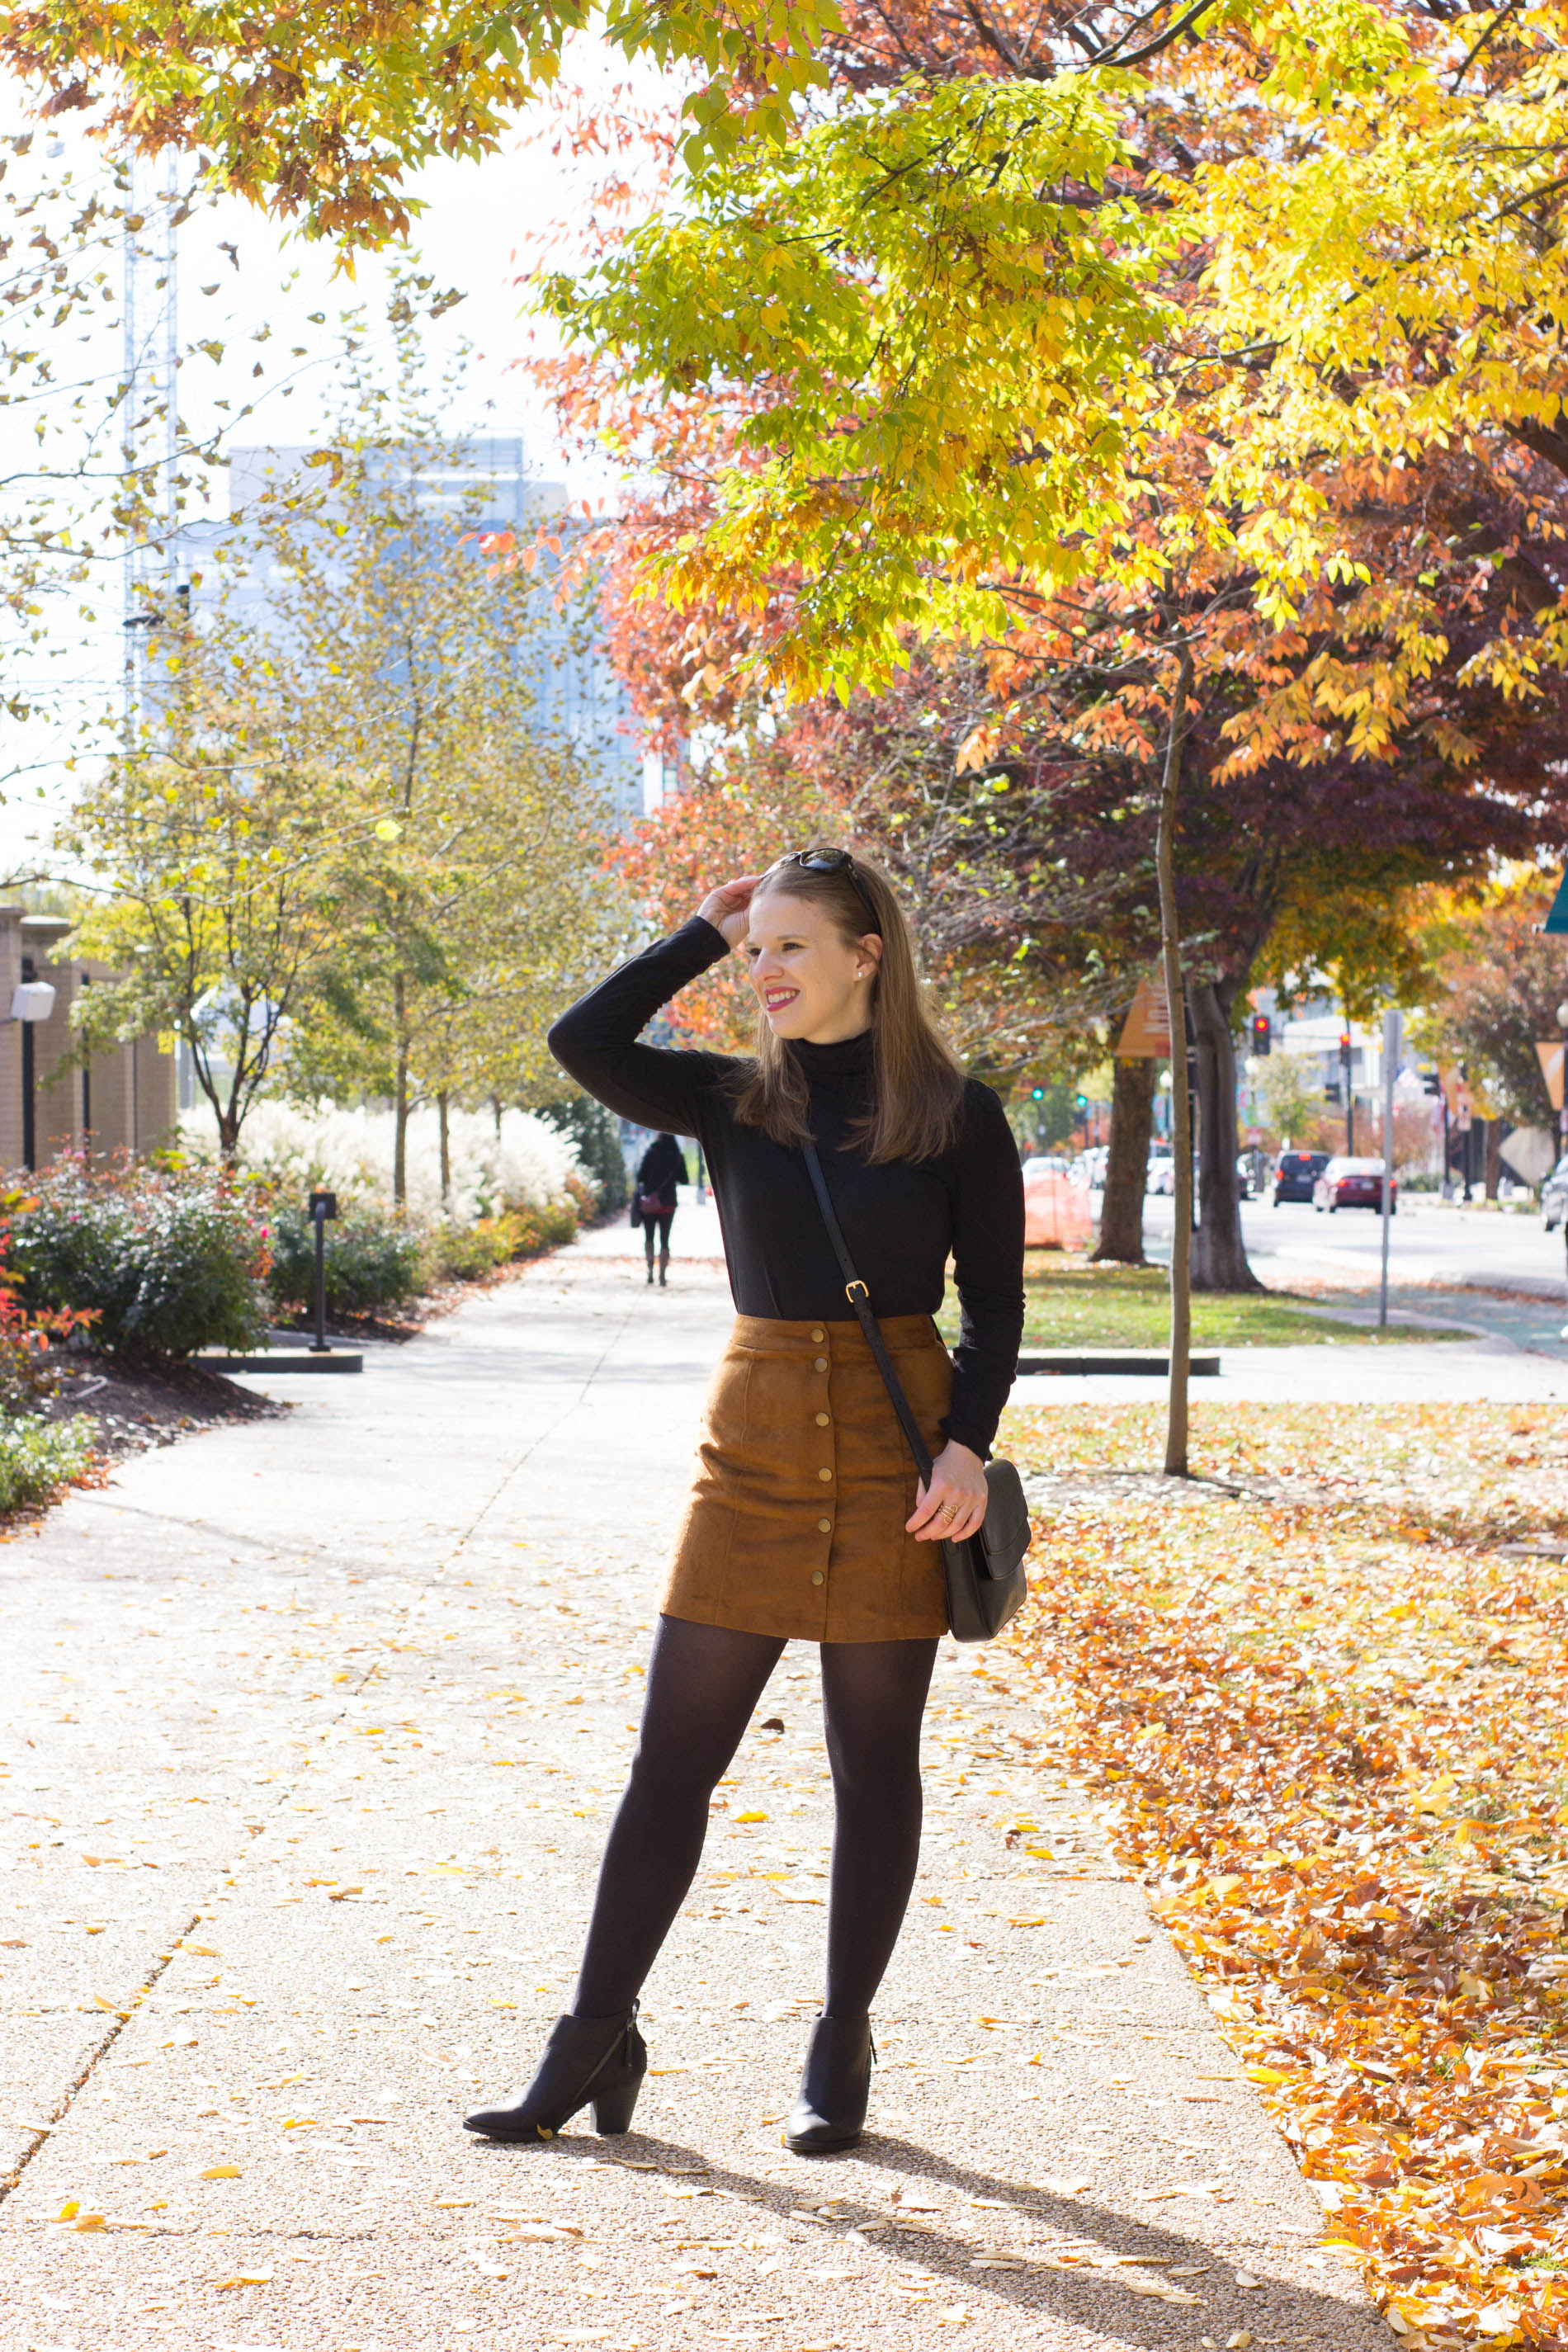 What Do You Wear to a Friendsgiving? | Something Good, @danaerinw , thanksgiving, outfits, holiday outfits, women's clothing, fashion, style, suede skirt, button front skirt, black turtleneck, turtleneck, j.crew, crossbody bag, black tights, black ankle boots, booties, fall outfits, thanksgiving outfits, holiday style